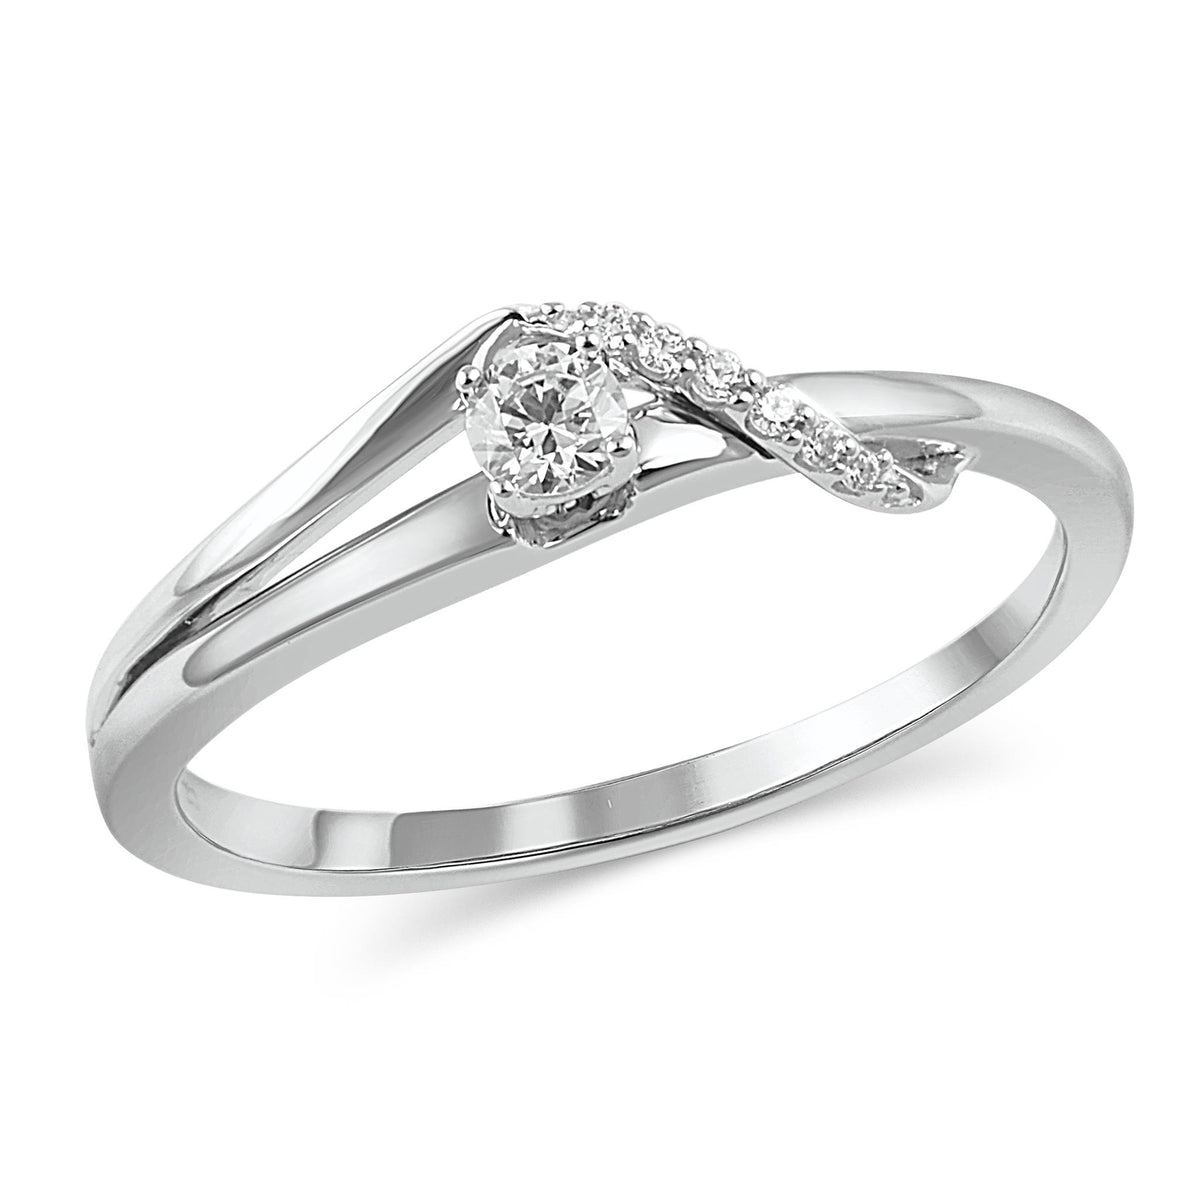 14Kt White Gold Classic Fashion Promise Ring With 0.15cttw Natural Diamonds